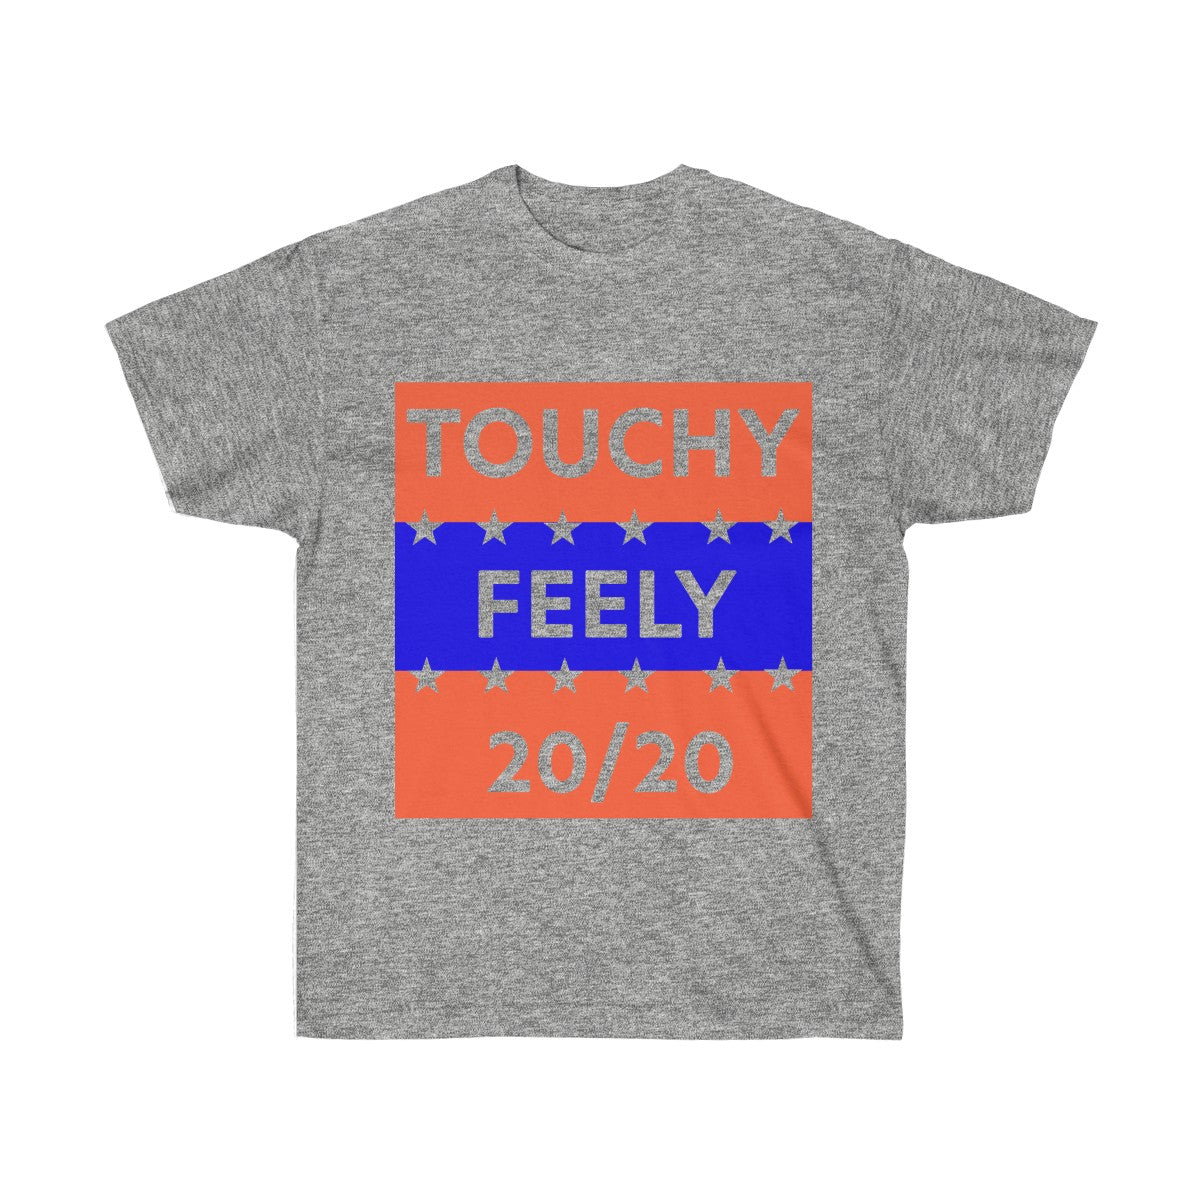 Touchy Feely 20/20 Funny Election Campaign Tee Shirt